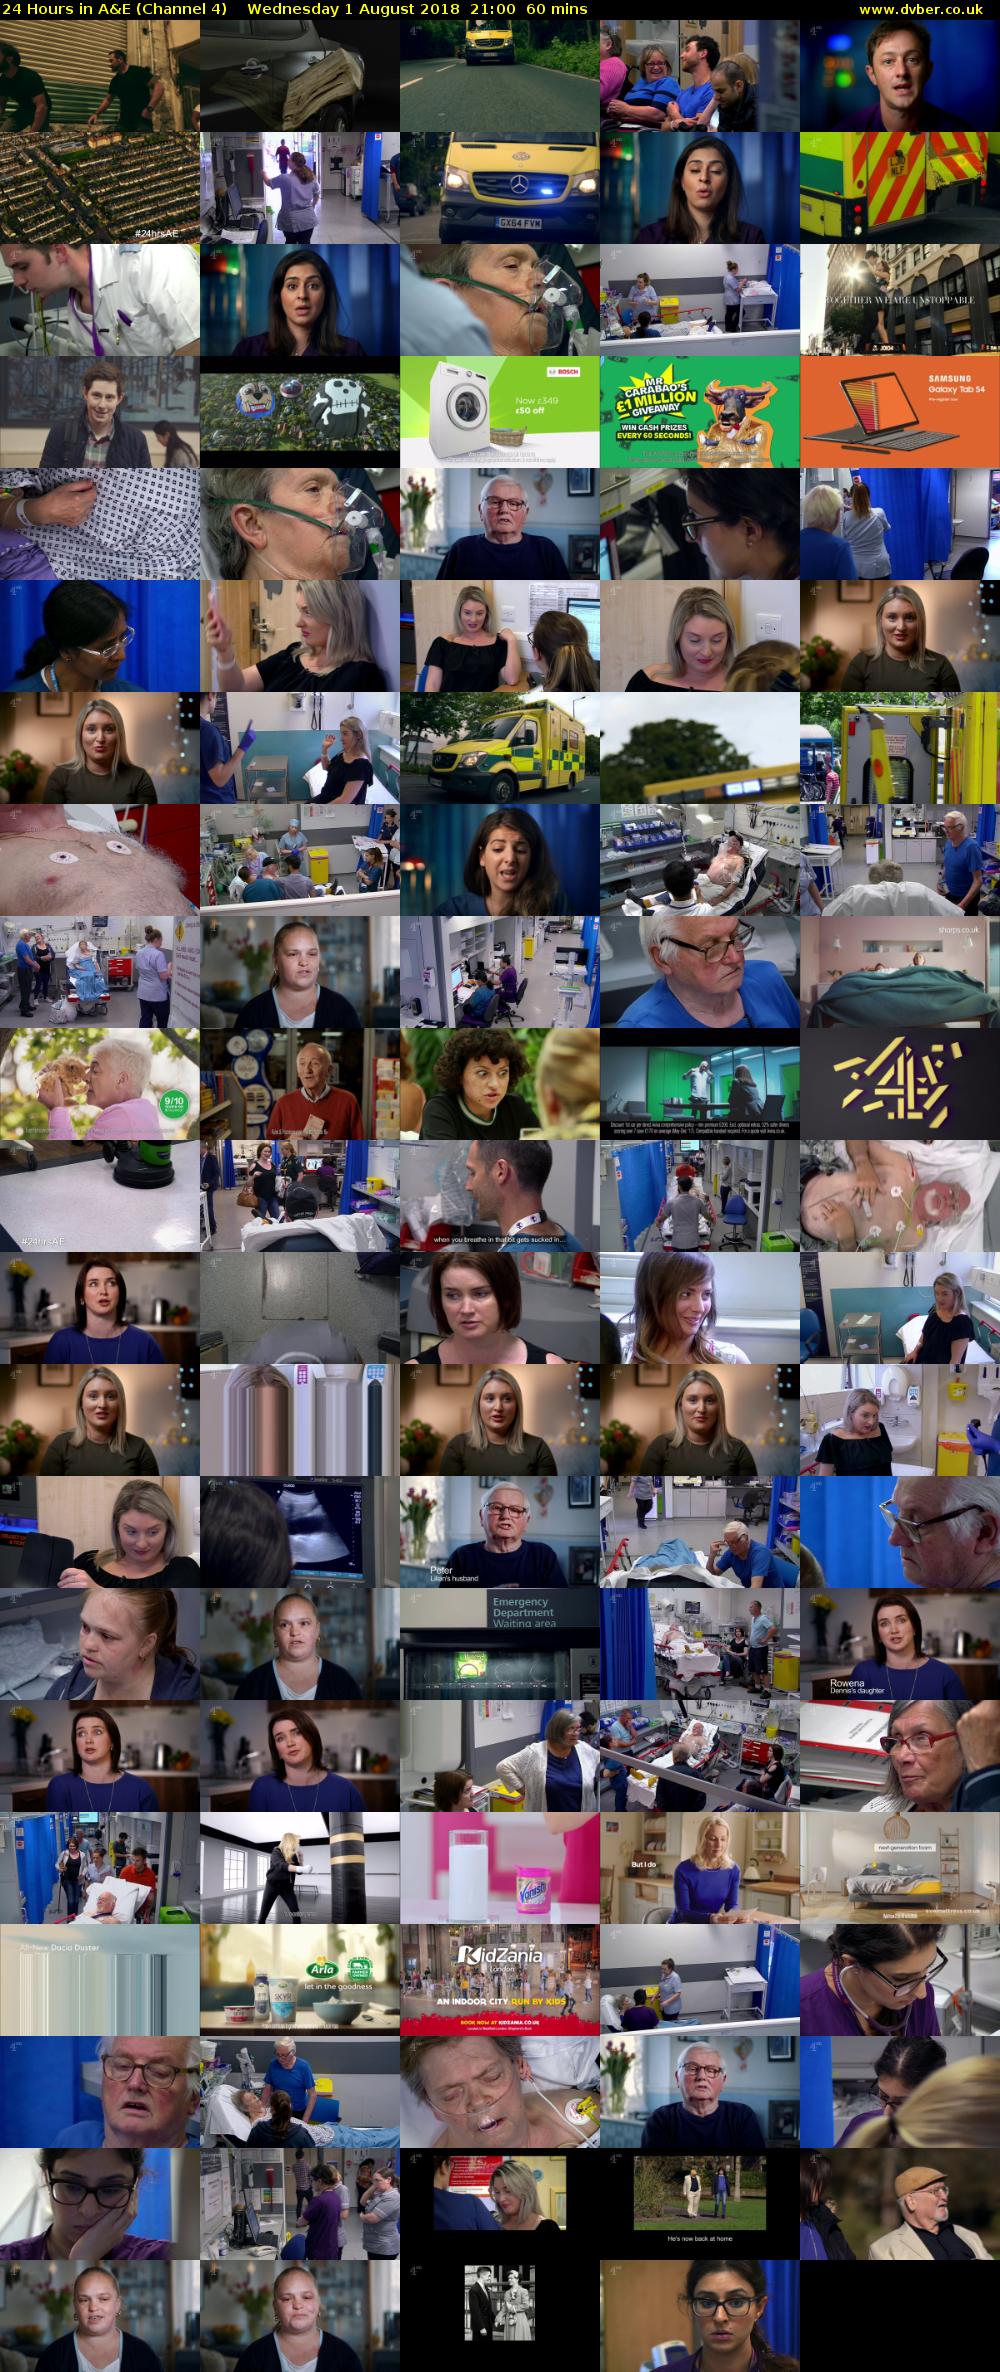 24 Hours in A&E (Channel 4) Wednesday 1 August 2018 21:00 - 22:00